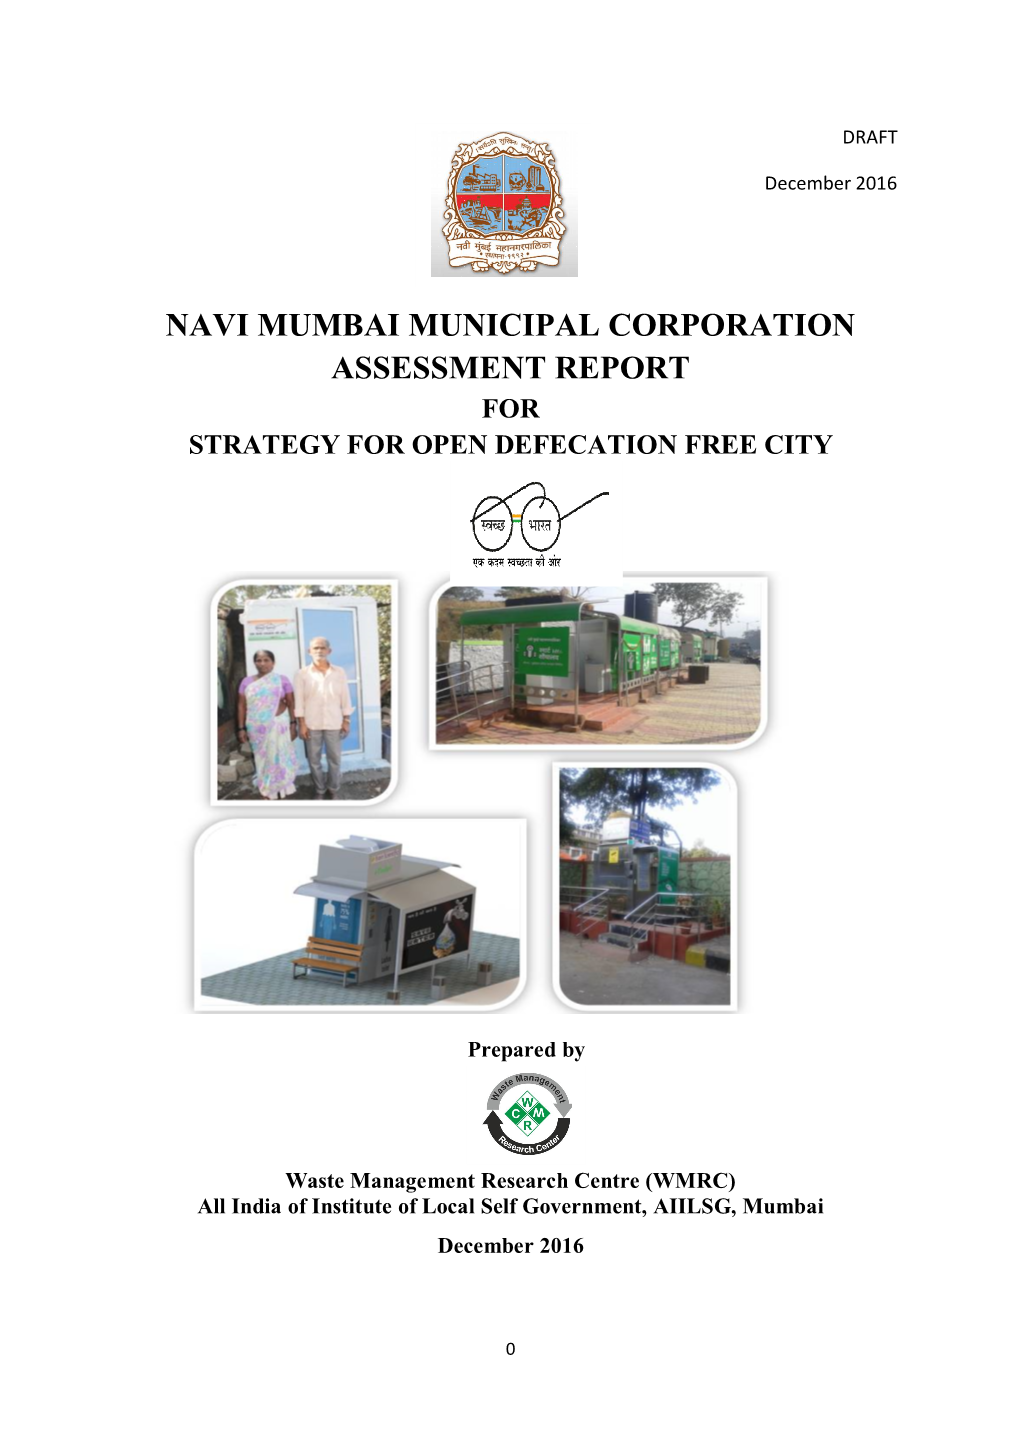 Navi Mumbai Municipal Corporation Assessment Report for Strategy for Open Defecation Free City